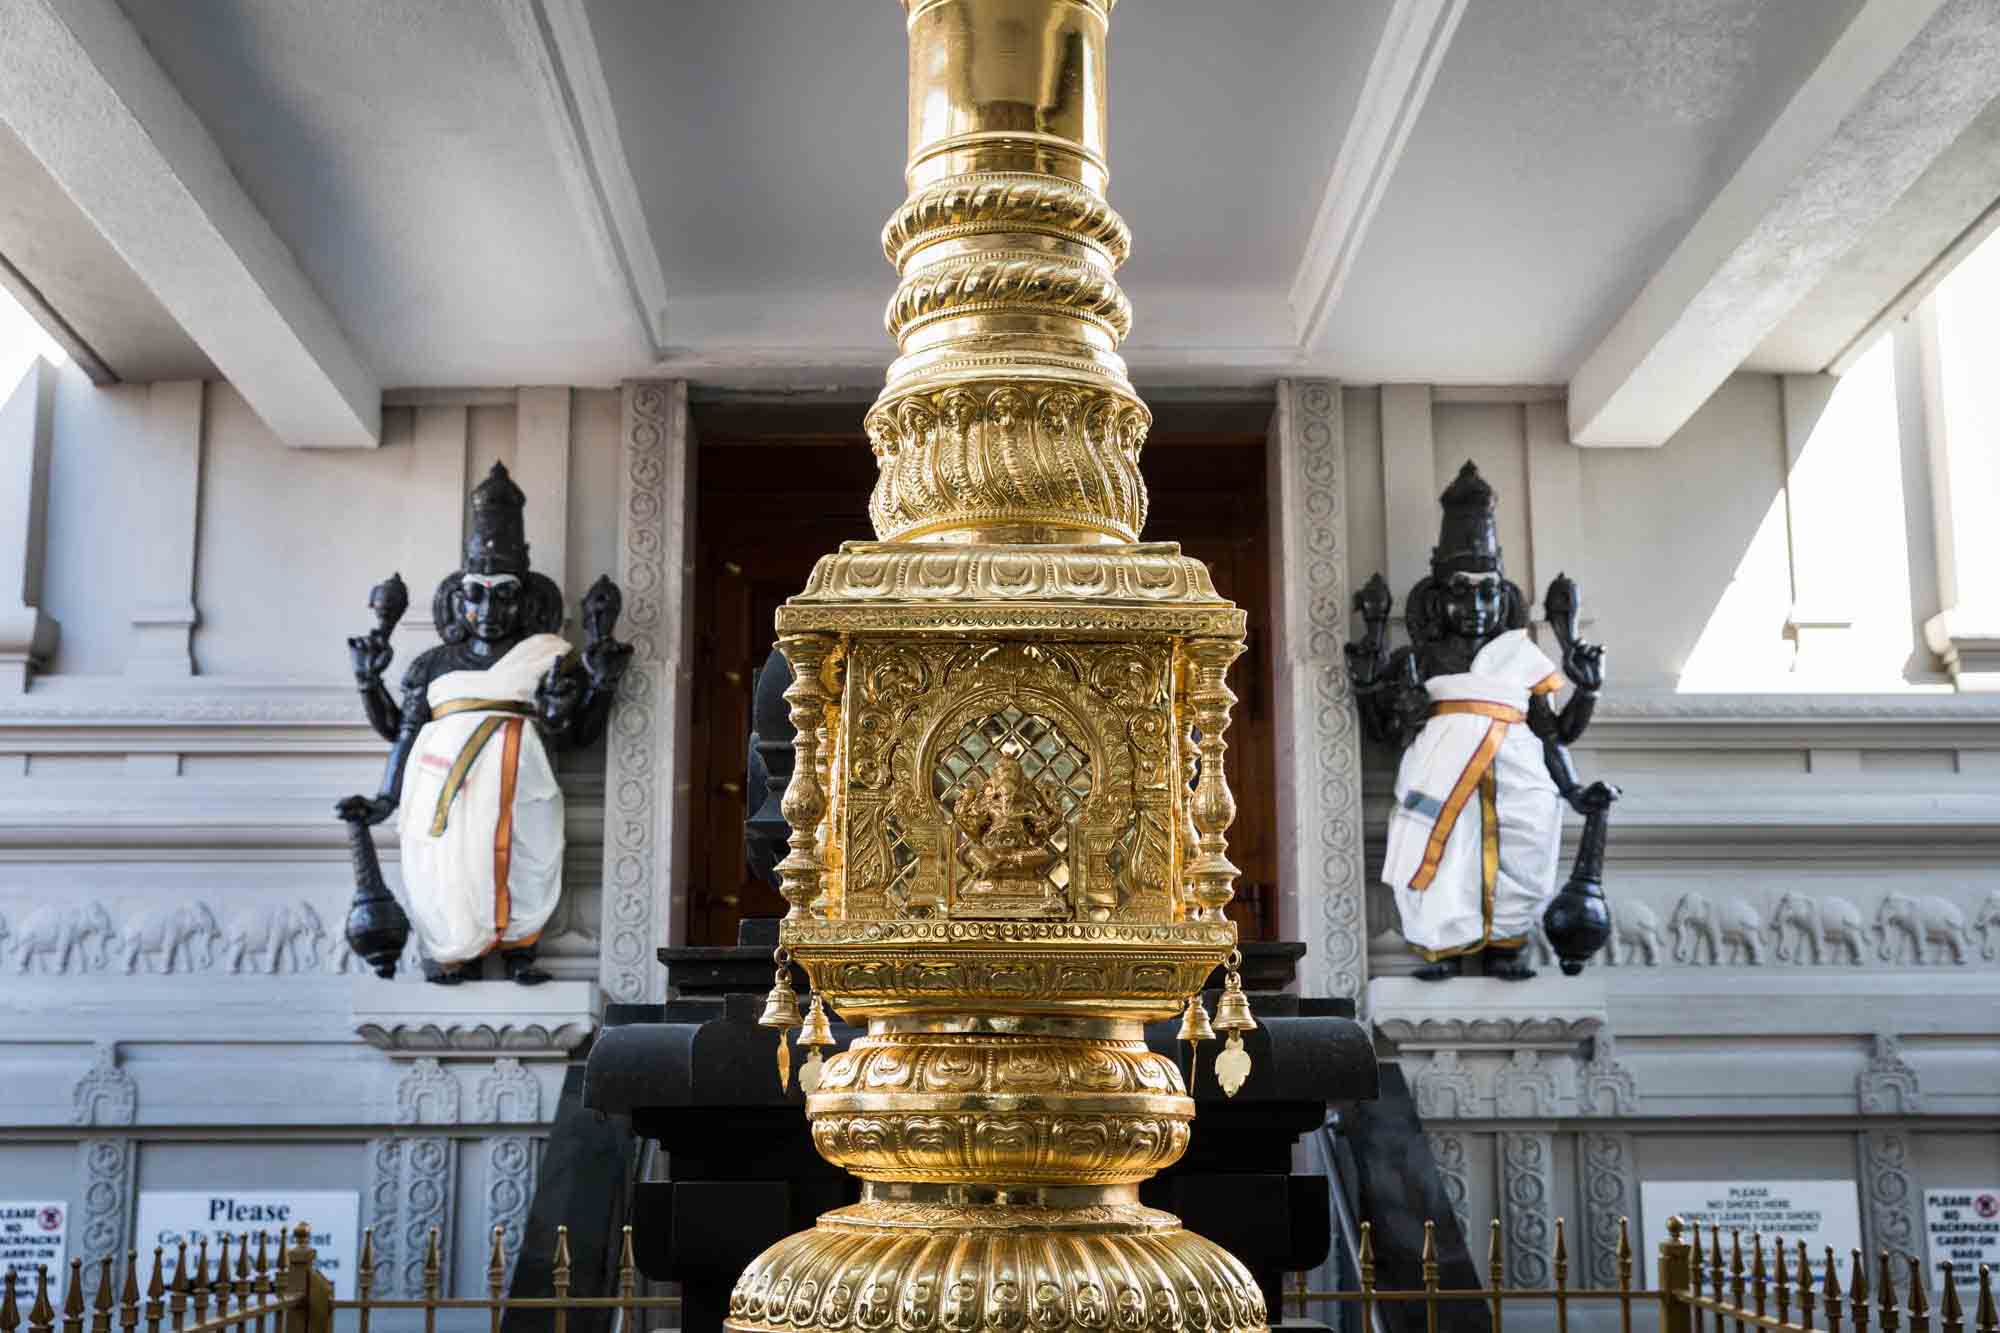 Gold sacred statue at the Hindu Temple Society of North America in Flushing